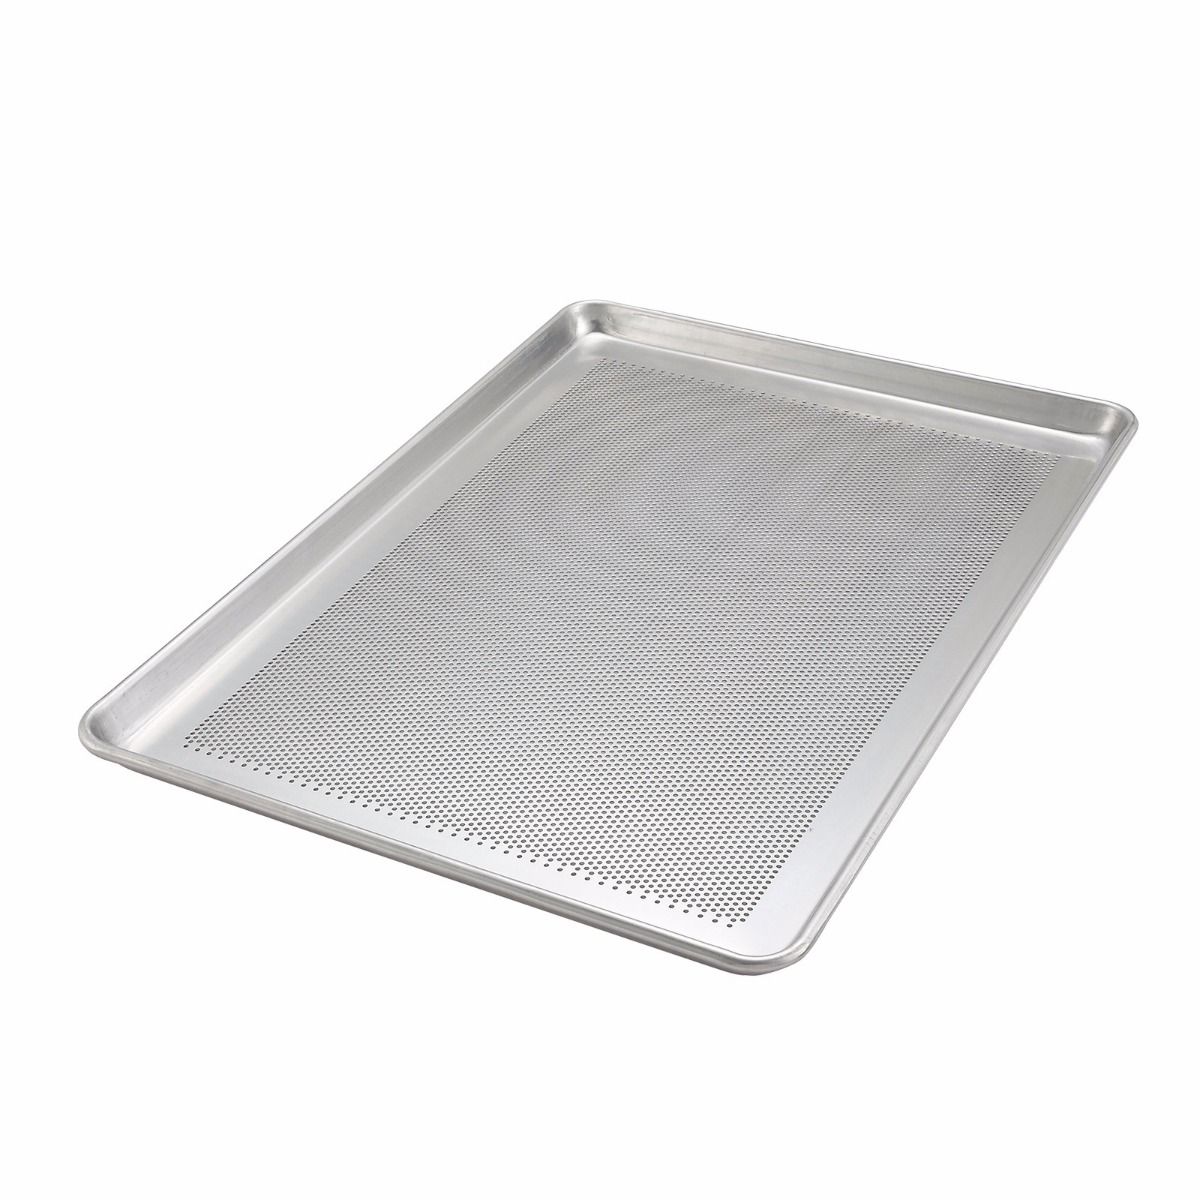 Chef Approved 19GEGHTBUN Chef Approved 6-1/2 X 9-1/2 1/8-Size Open Bead  16-Gauge Heavy Duty Aluminum Sheet Pan